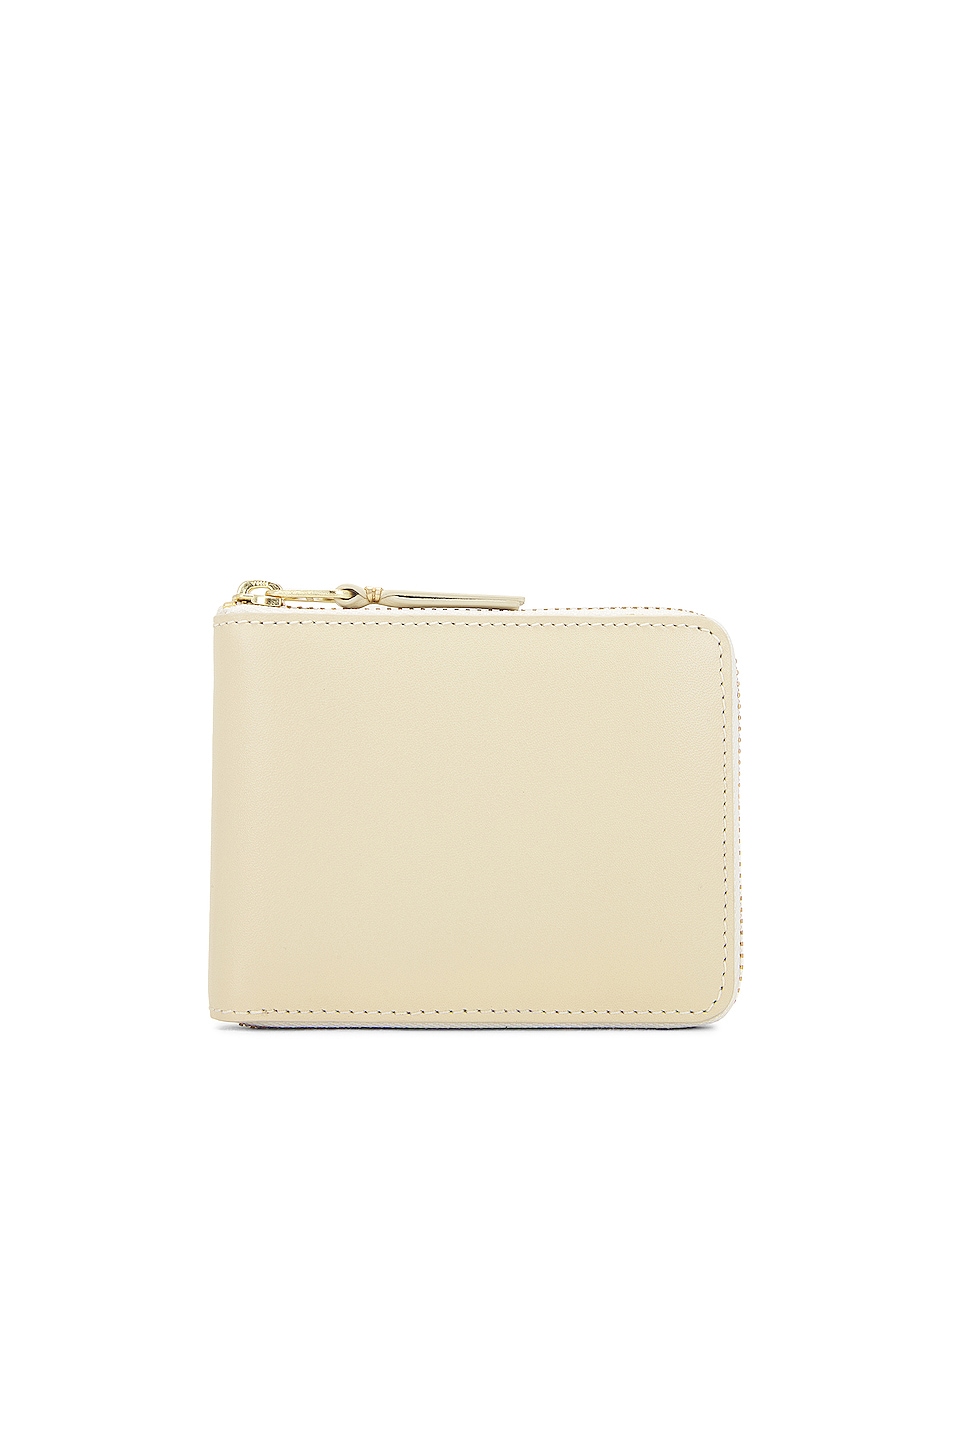 Classic Leather Zip Wallet in Ivory